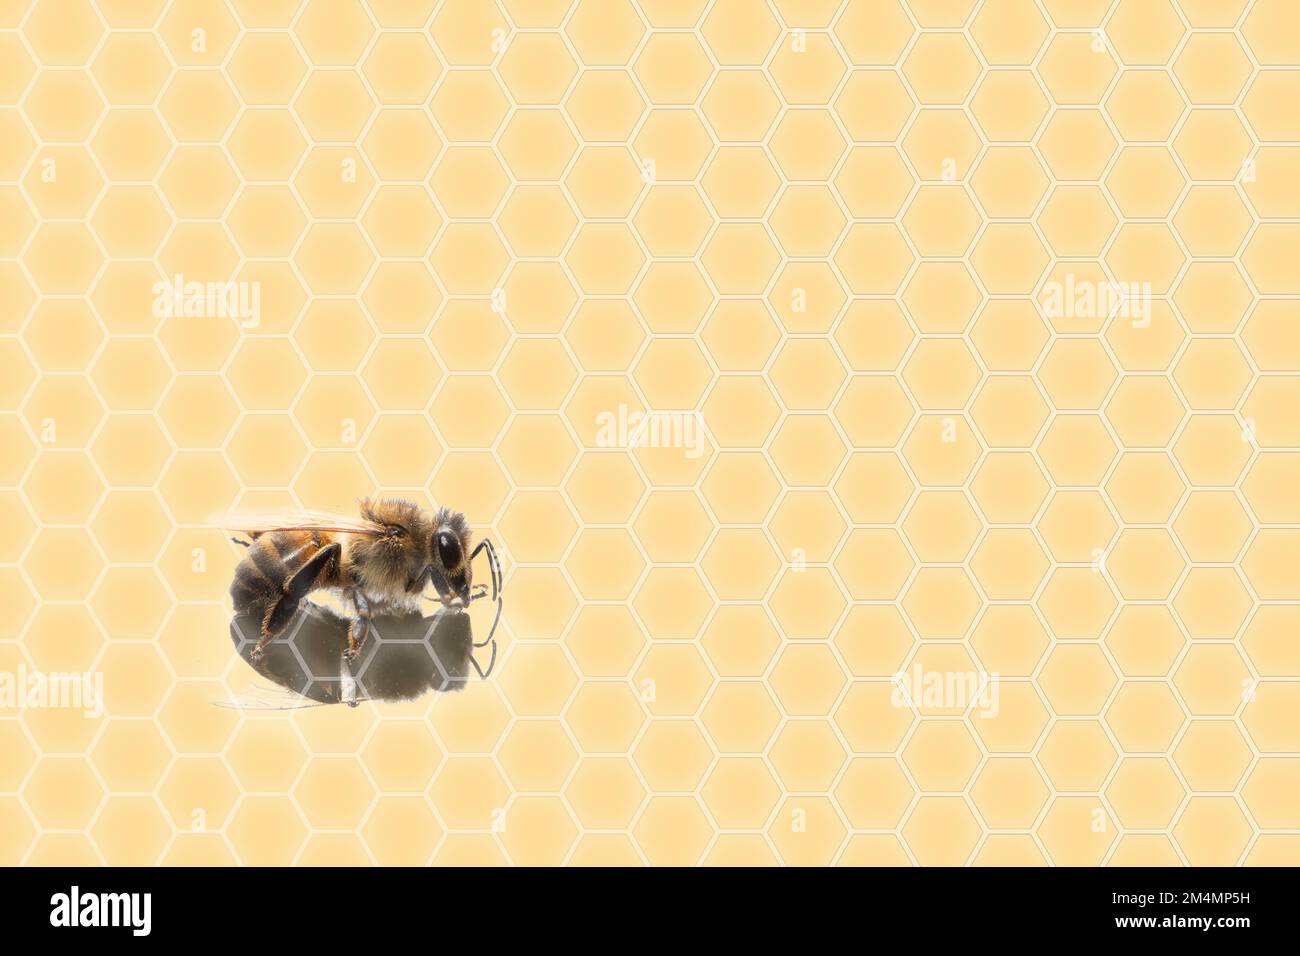 Honey bee on a yellow background with hexagons representing the hive. Concept of bee venom cosmetics used in skin care with various benefits, such as Stock Photo